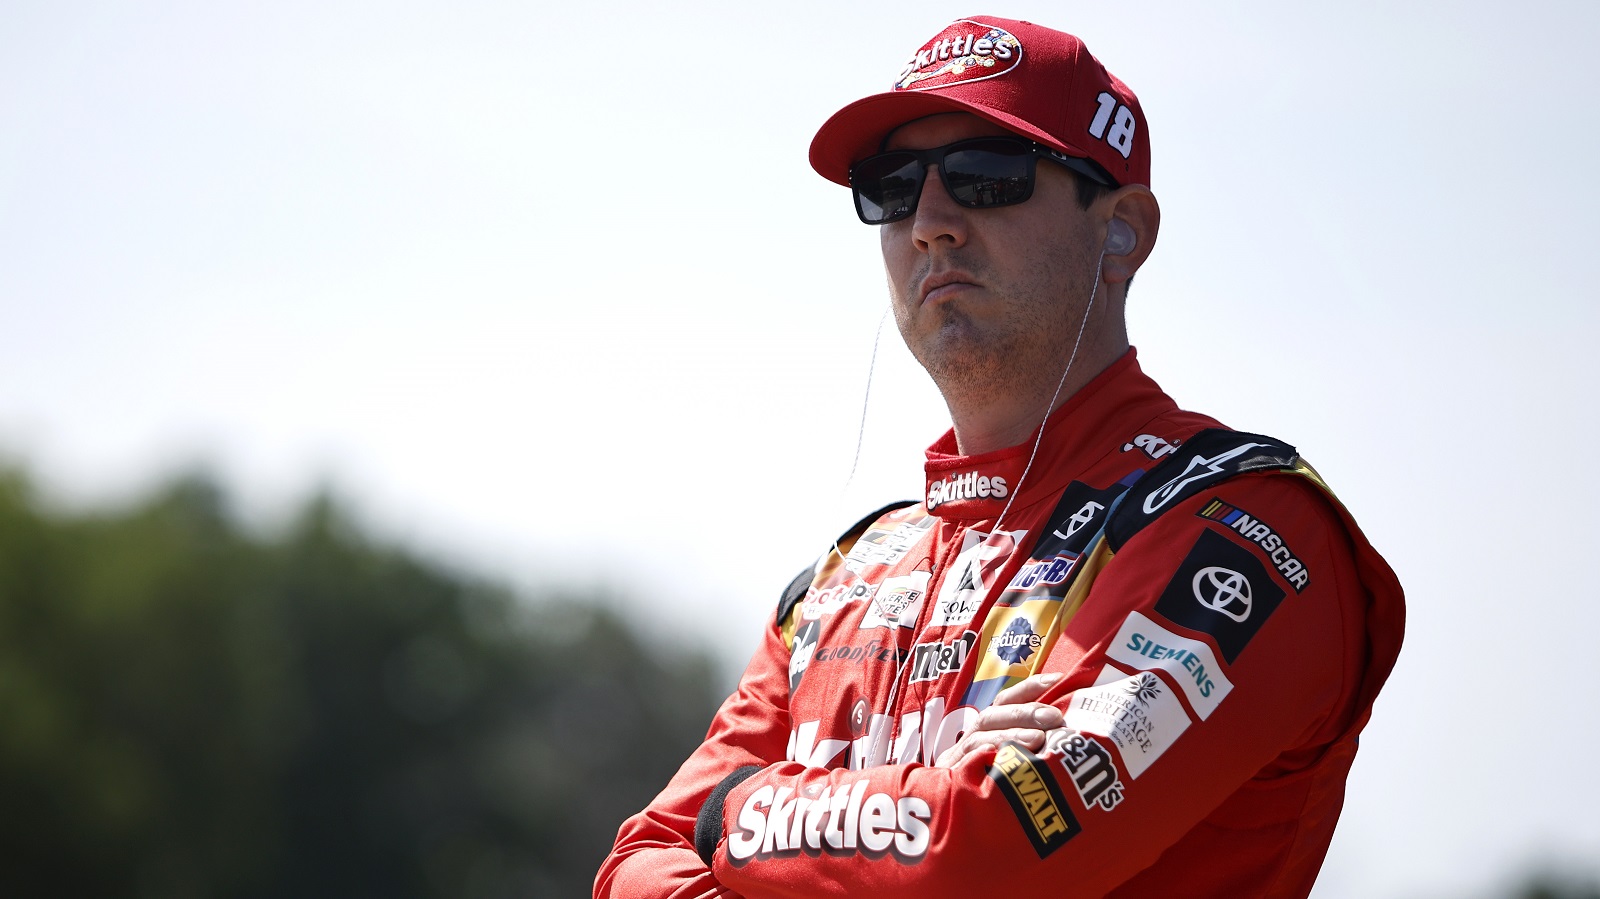 Kyle Busch looks on during practice for the NASCAR Cup Series Kwik Trip 250 at Road America on July 2, 2022 in Elkhart Lake, Wisconsin. | Sean Gardner/Getty Images